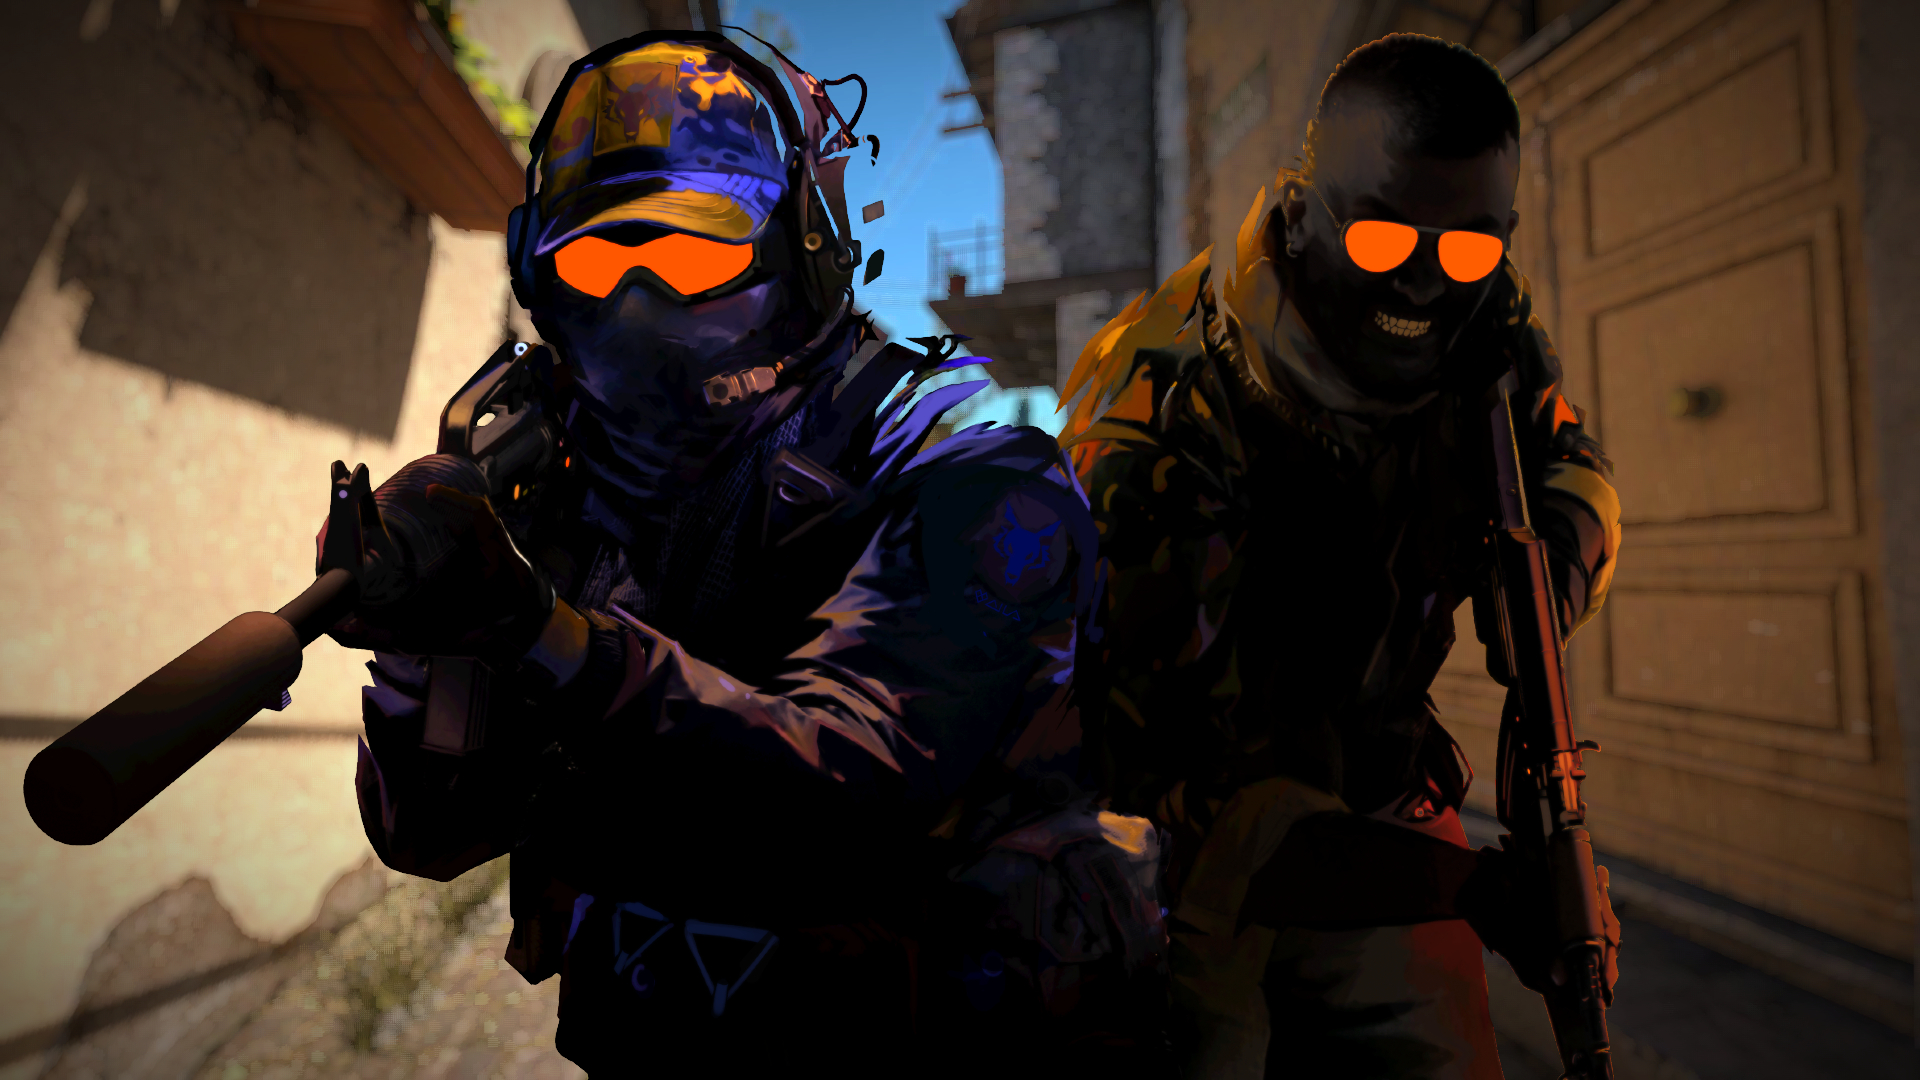 Counter-Strike 2 officially announced: Coming Summer 2023 - The